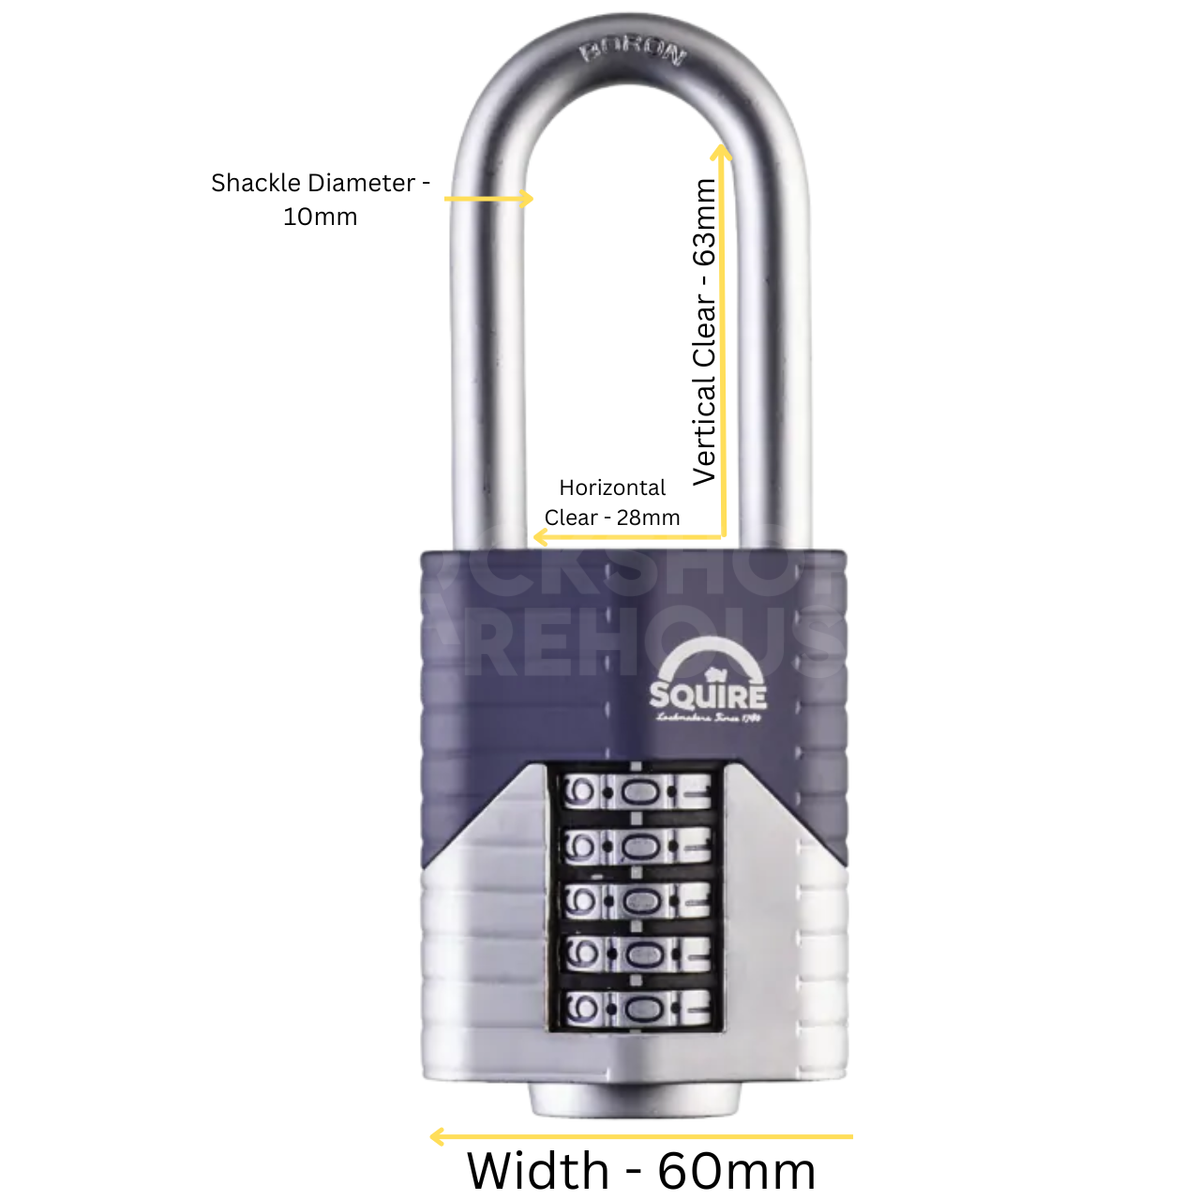 Dimensions Image: SQUIRE Vulcan 60mm 2.5" Long Shackle Combination Padlock - 5 Wheel